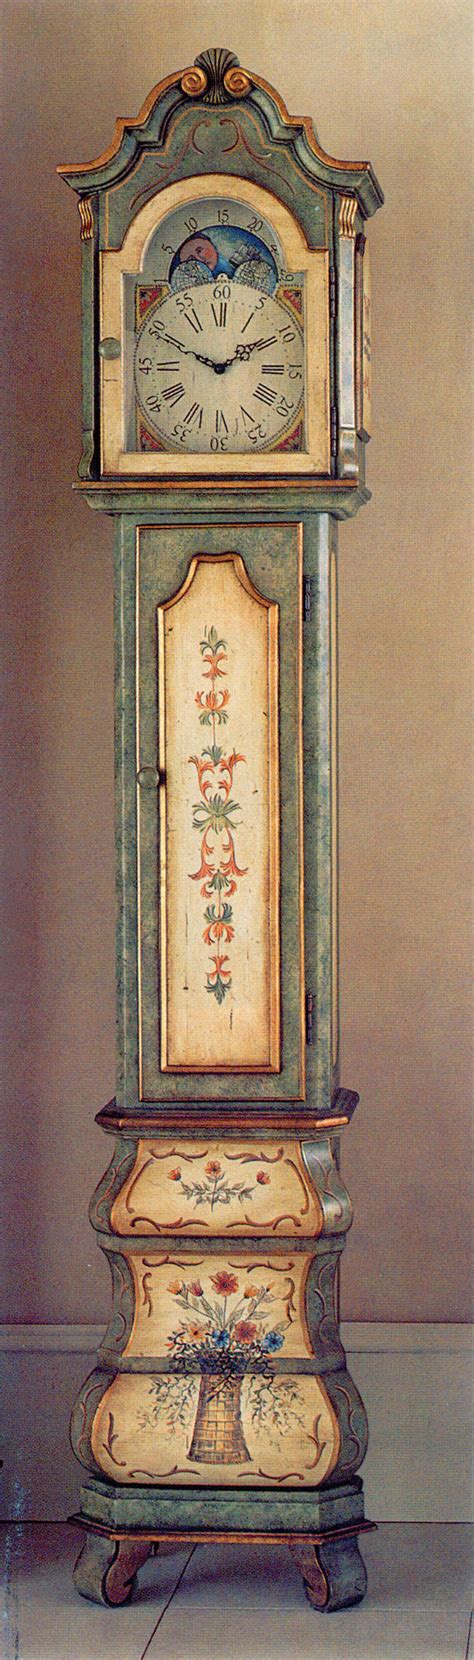 Hand Painted Grandfather Clock From Horchows With Florentine Motifs